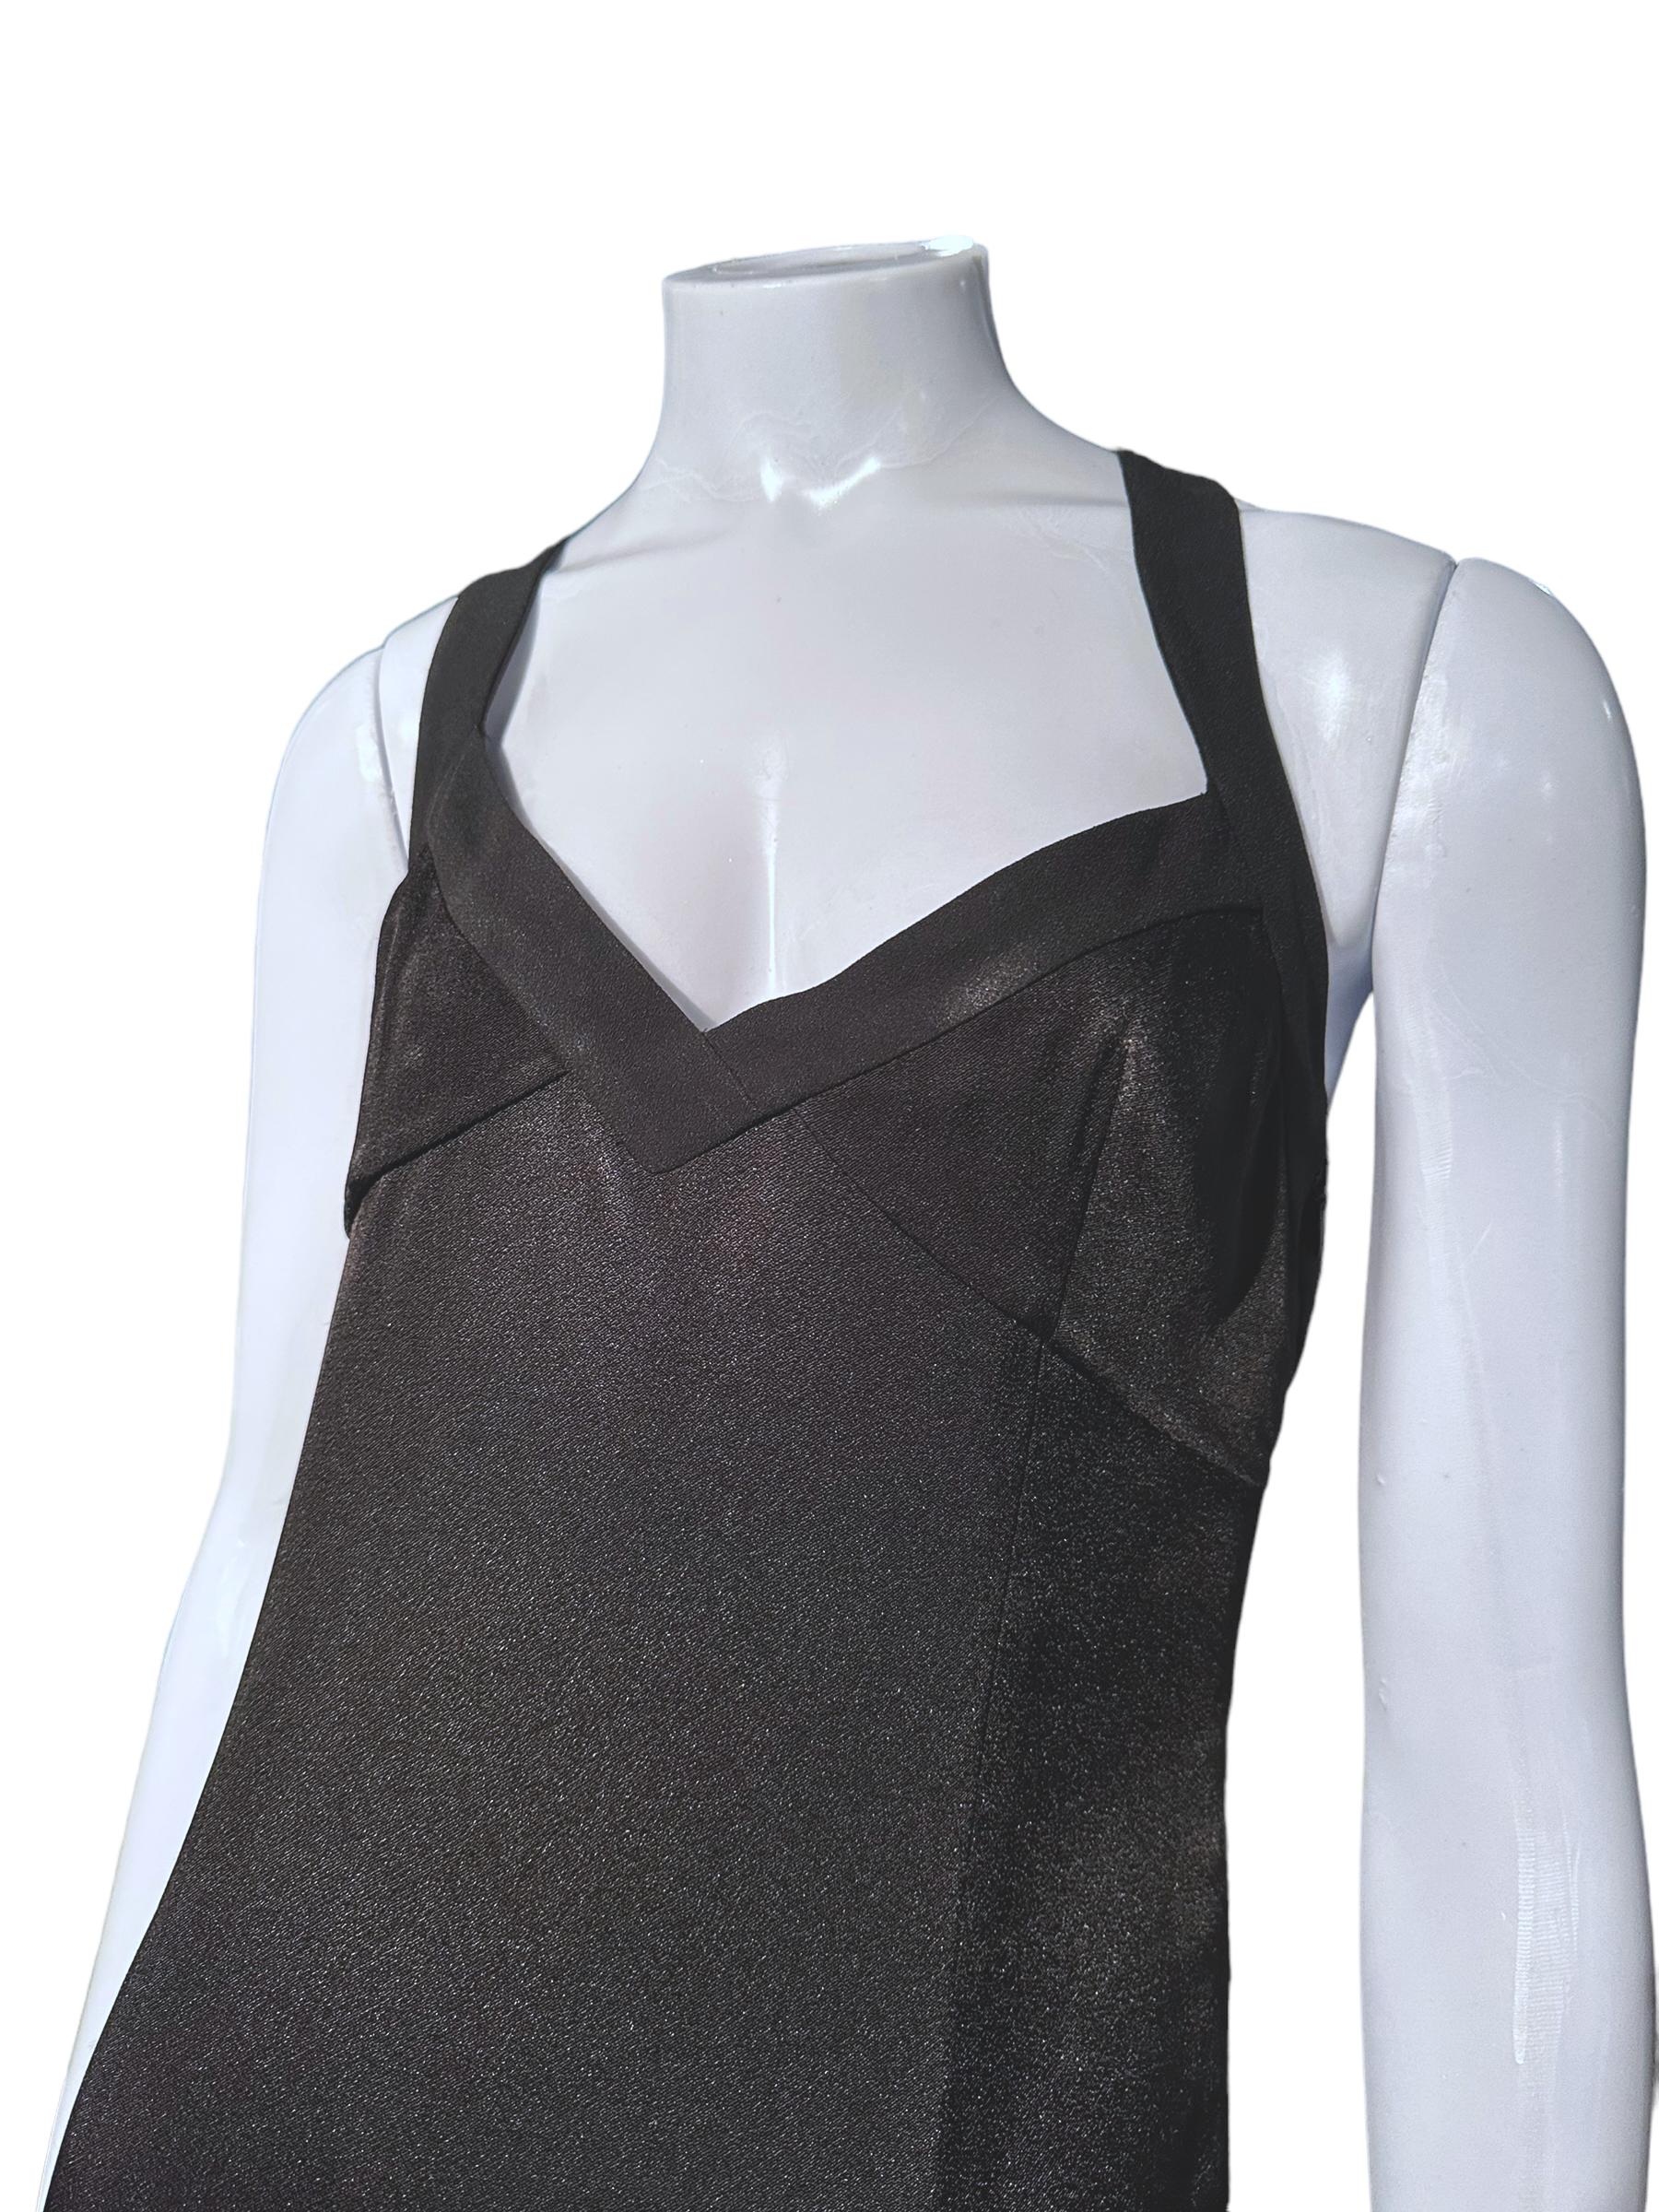 Christian Dior By John Galliano Fw 2004 Black Bias Cut Silk Slip Dress In Excellent Condition For Sale In São Paulo, SP